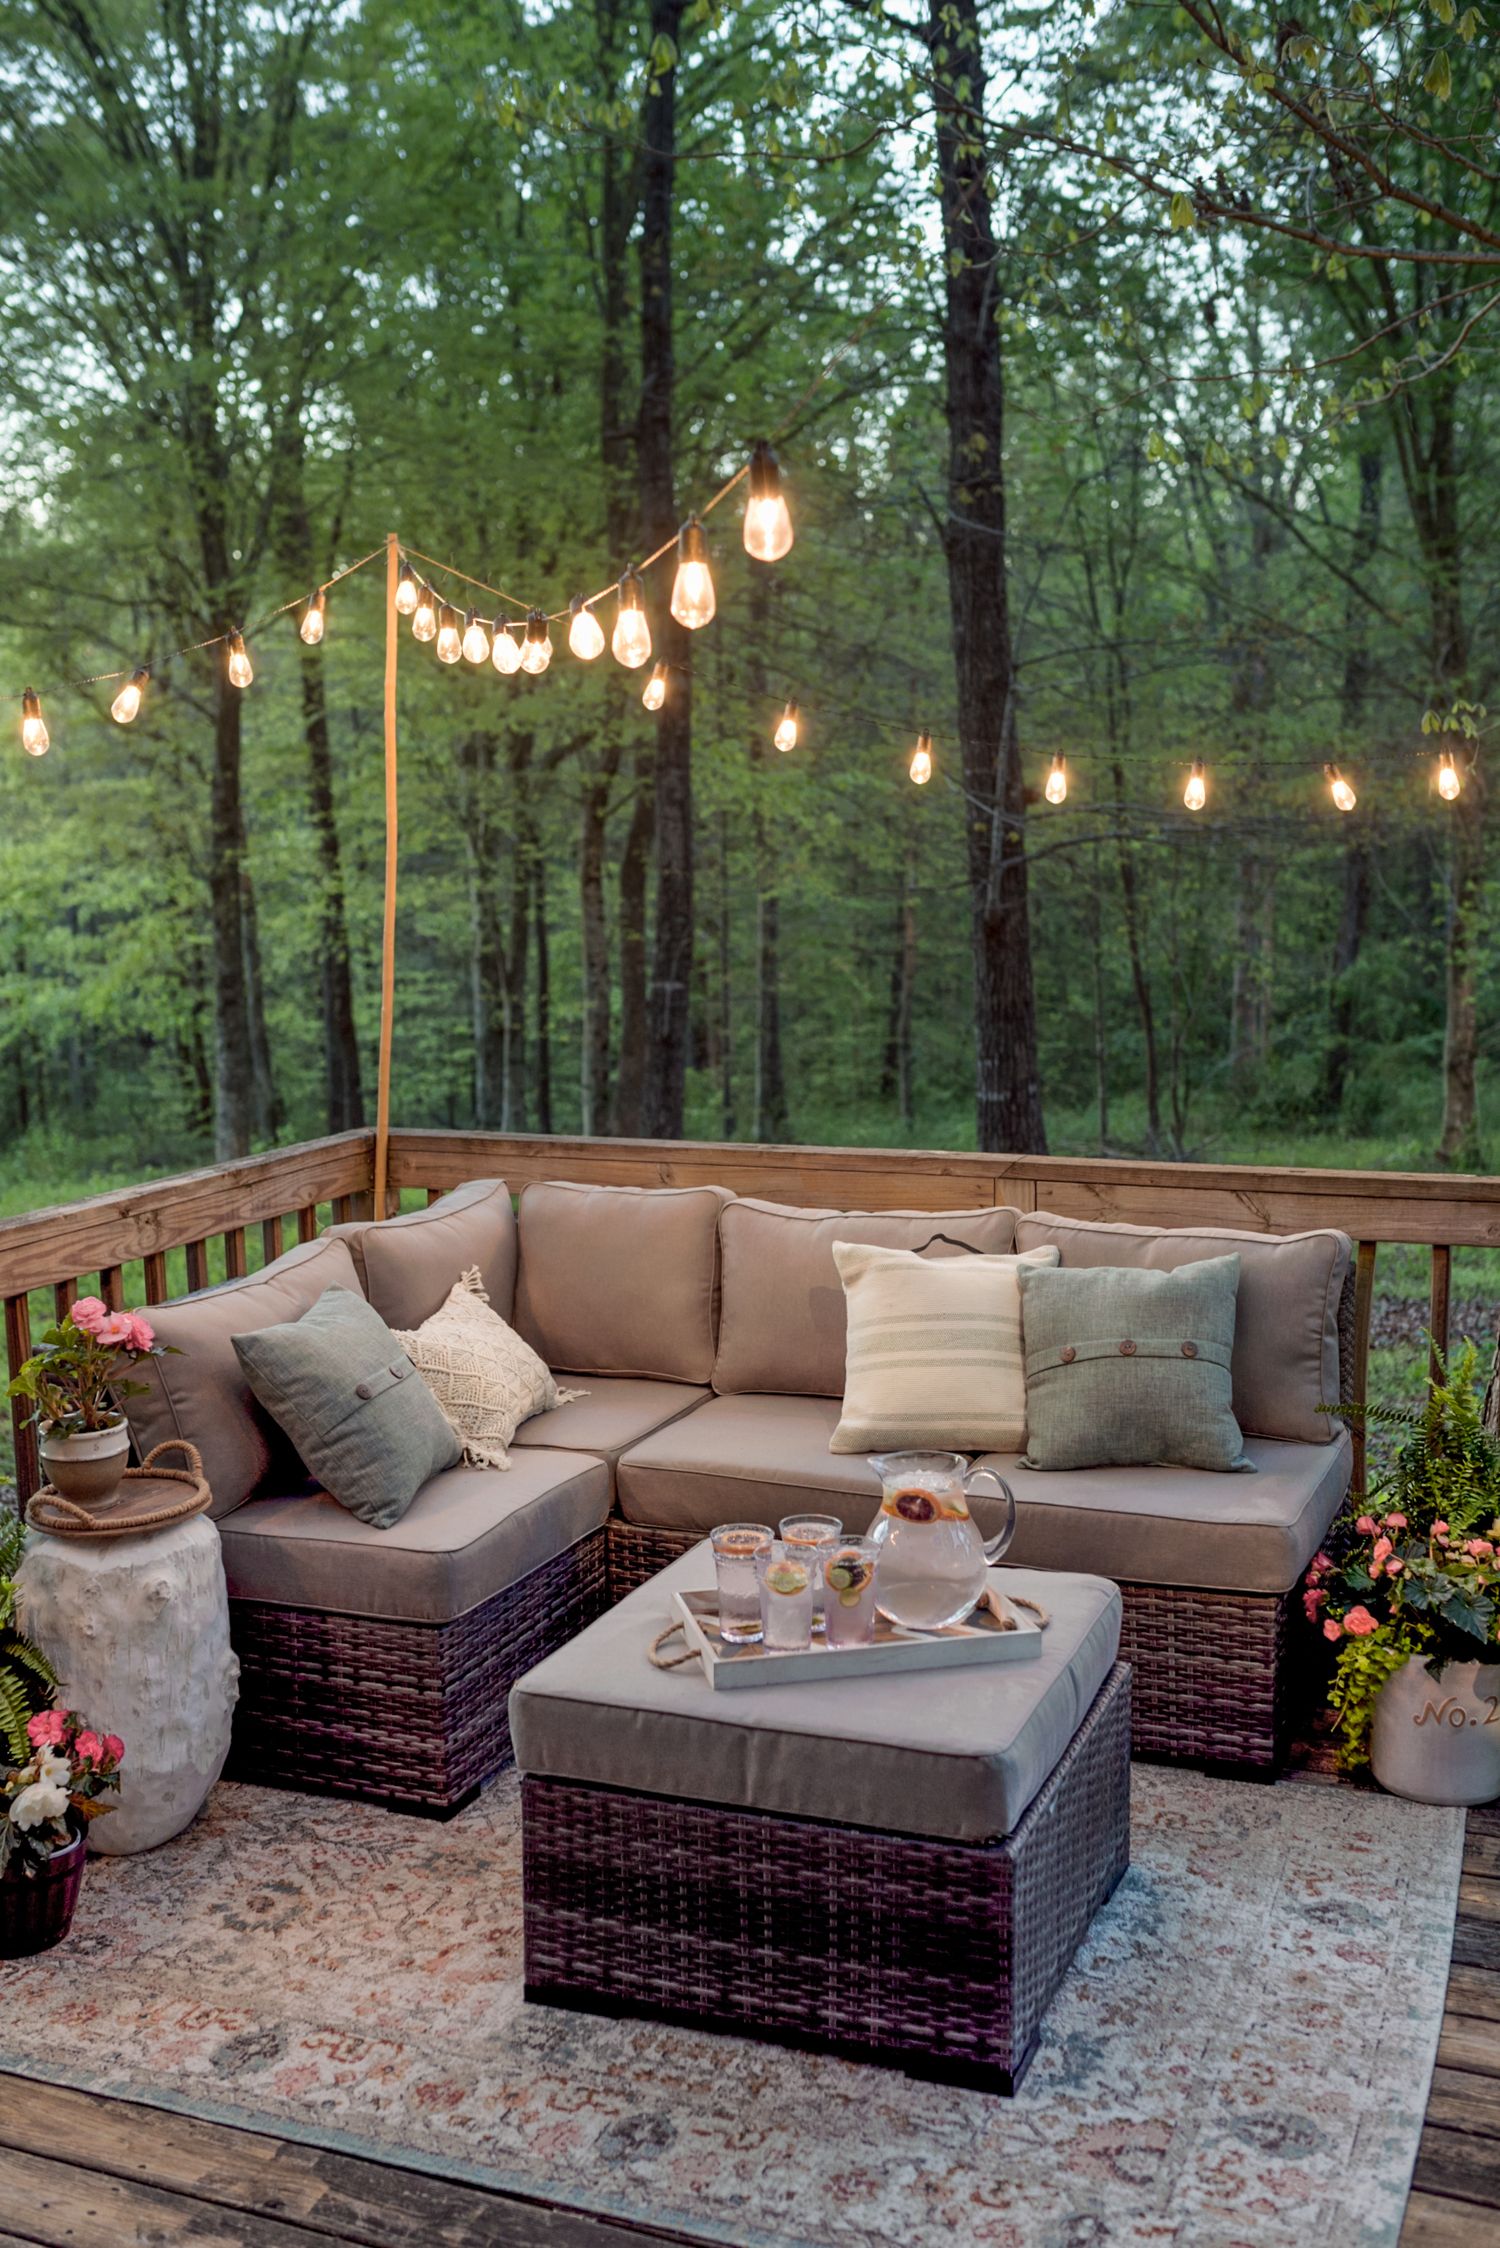 Choosing The Right Furniture For Your Patio Or Outdoor Space